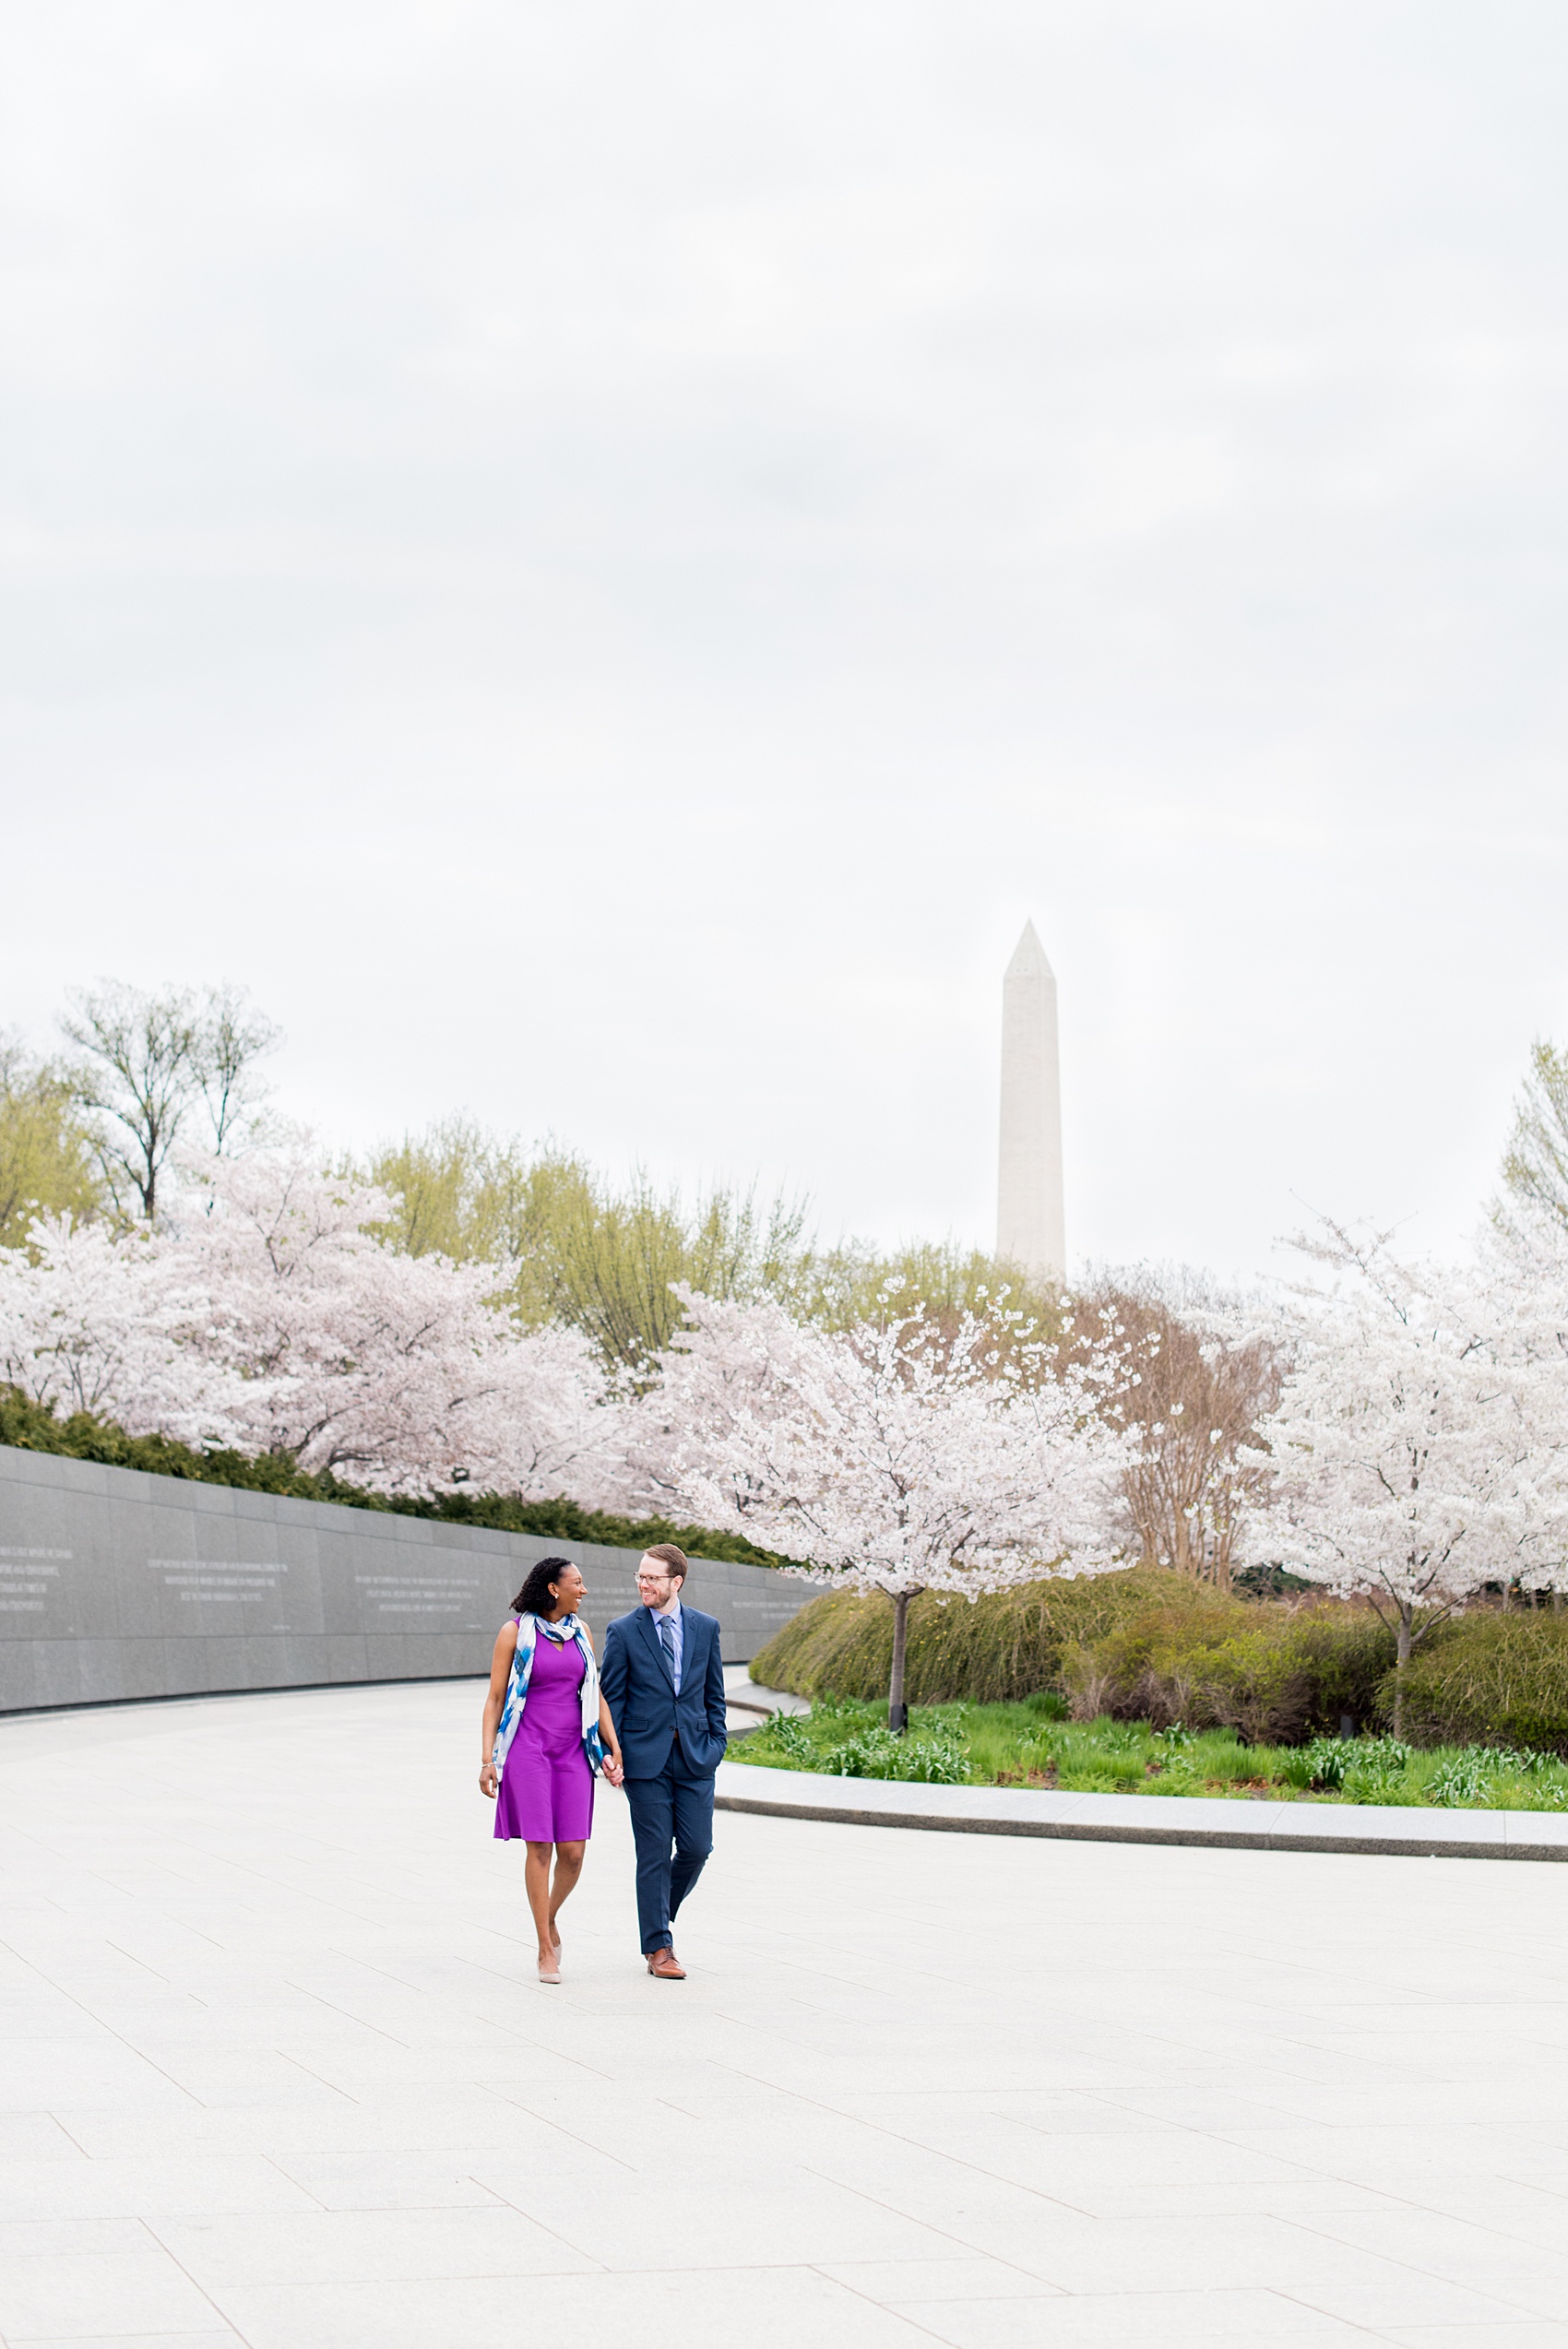 DC Cherry Blossoms Engagement Photos by Mikkel Paige Photography. Spring flowers at the Martin Luther King Jr. memorial with the Washington Monument in the background, at the nation's Capitol with an interracial couple in colorful outfits. #DCCherryBlossoms #CherryBlossoms #EngagementPhotos #SpringEngagementPhotos #CherryBlossomsEngagementPhotos